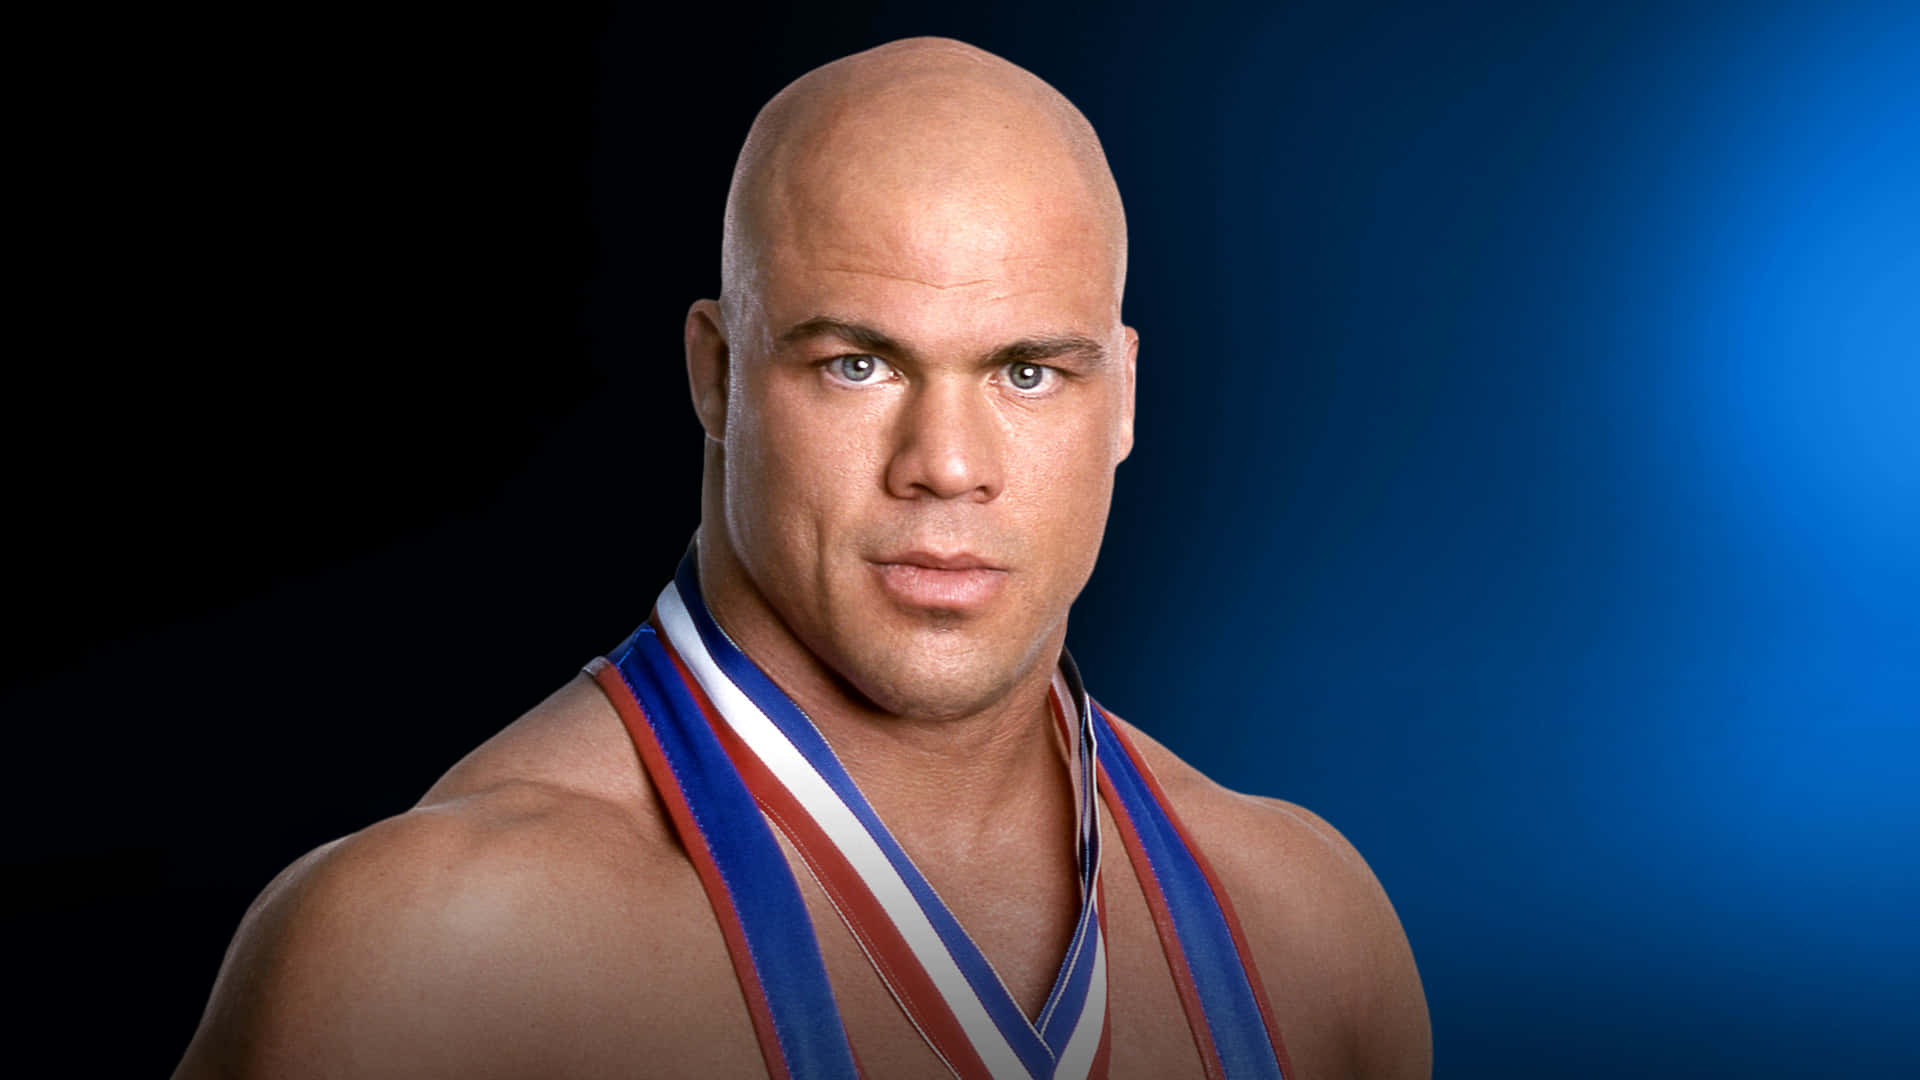 WWE Hall of Famer Kurt Angle Poses in Black and Blue Gradient Background Wallpaper